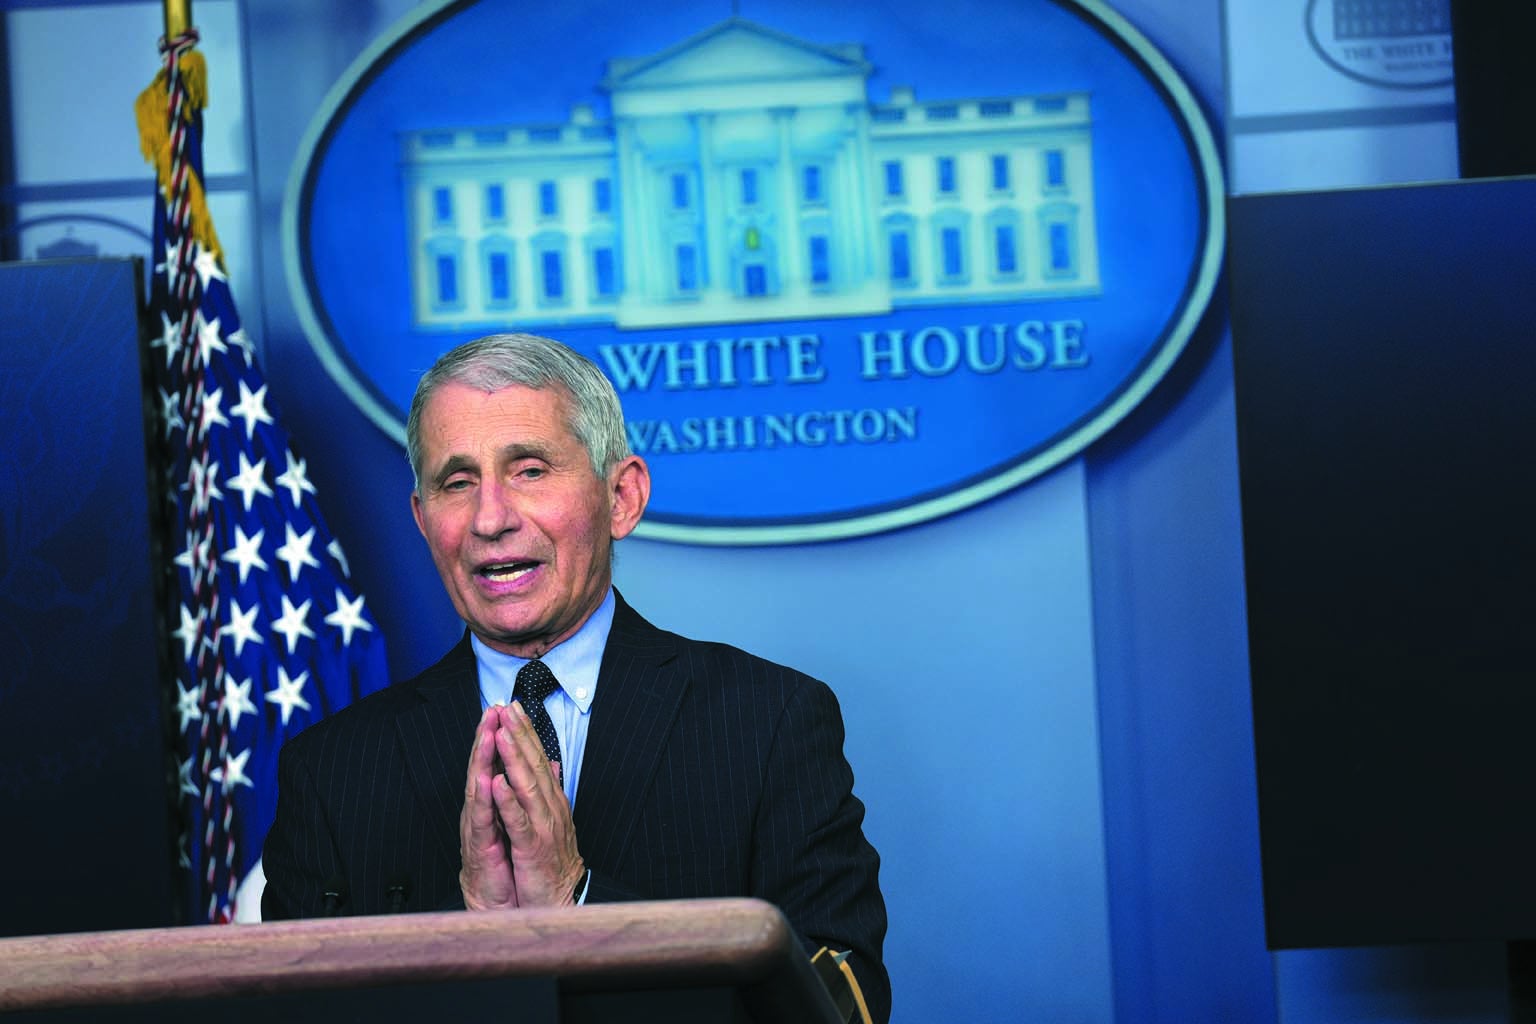 Doctor Anthony Fauci